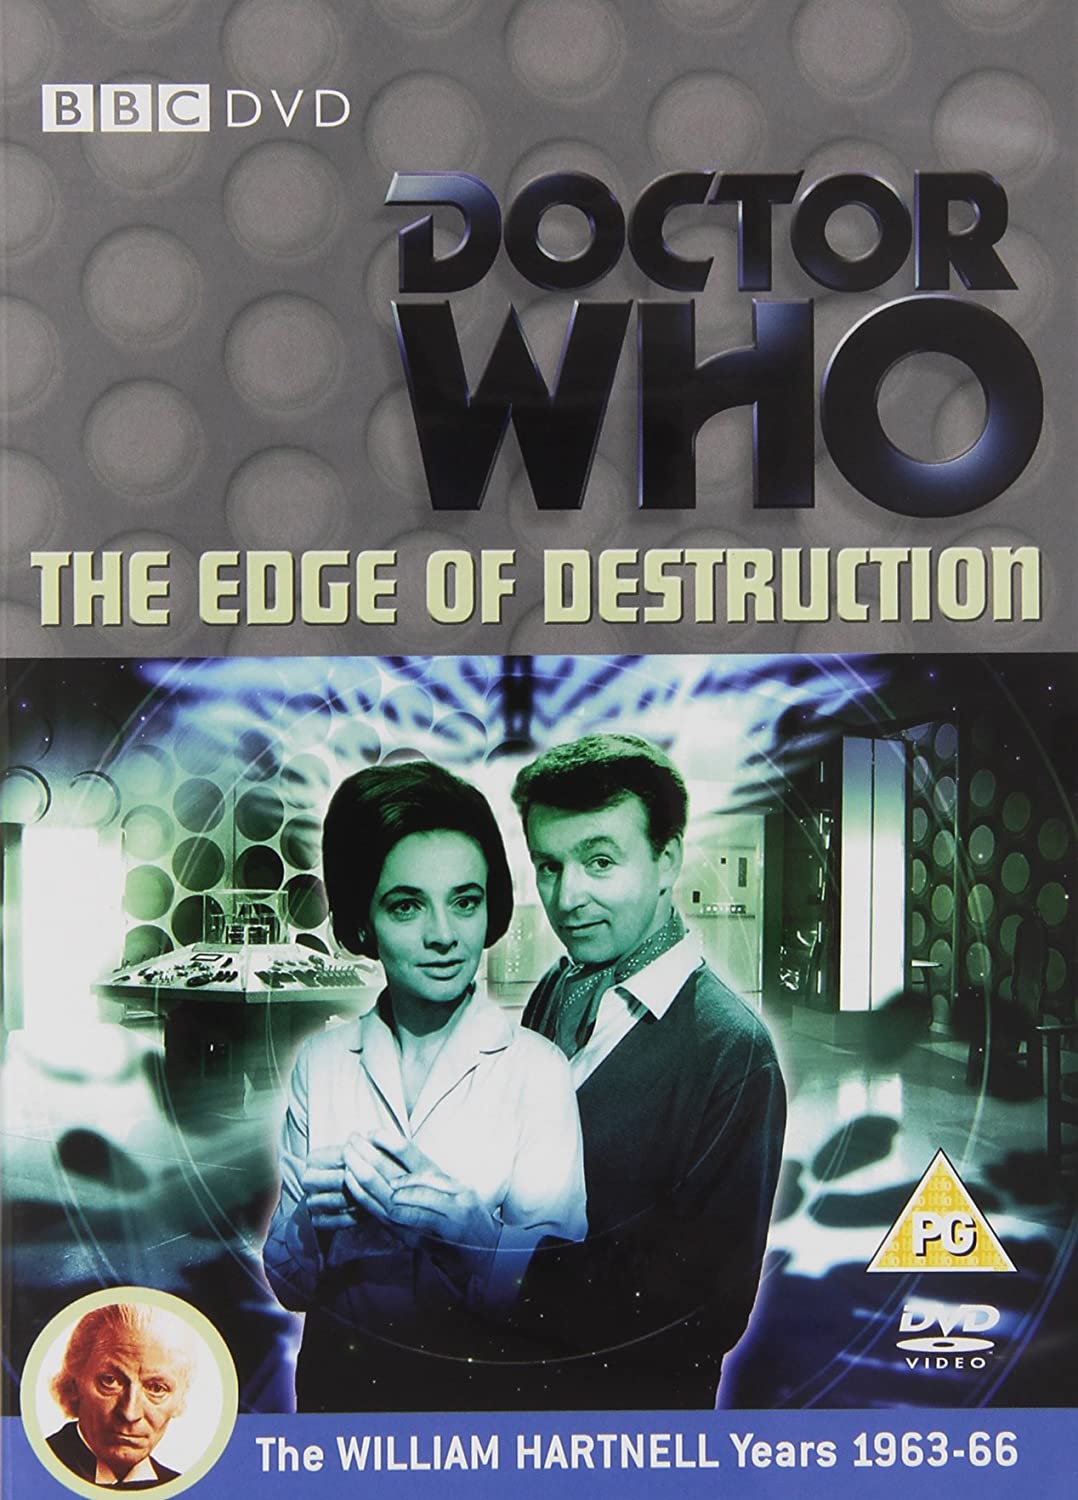 Doctor Who - The Beginning: An Unearthly Child / The Daleks / The Edge of Destruction - [DVD]